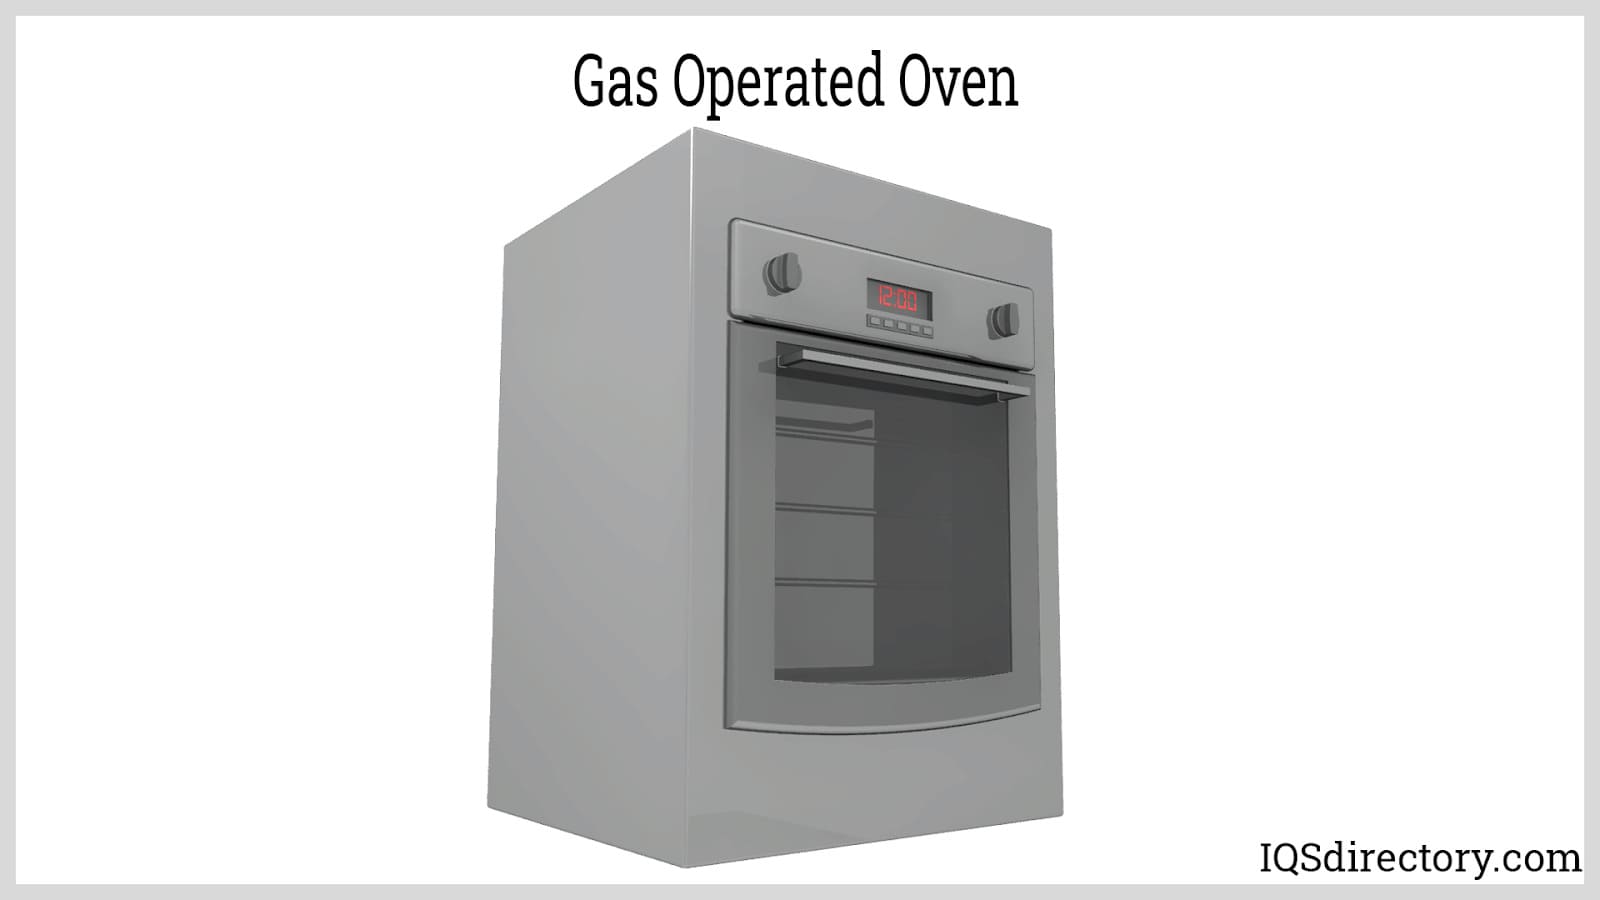 Gas Operated Oven